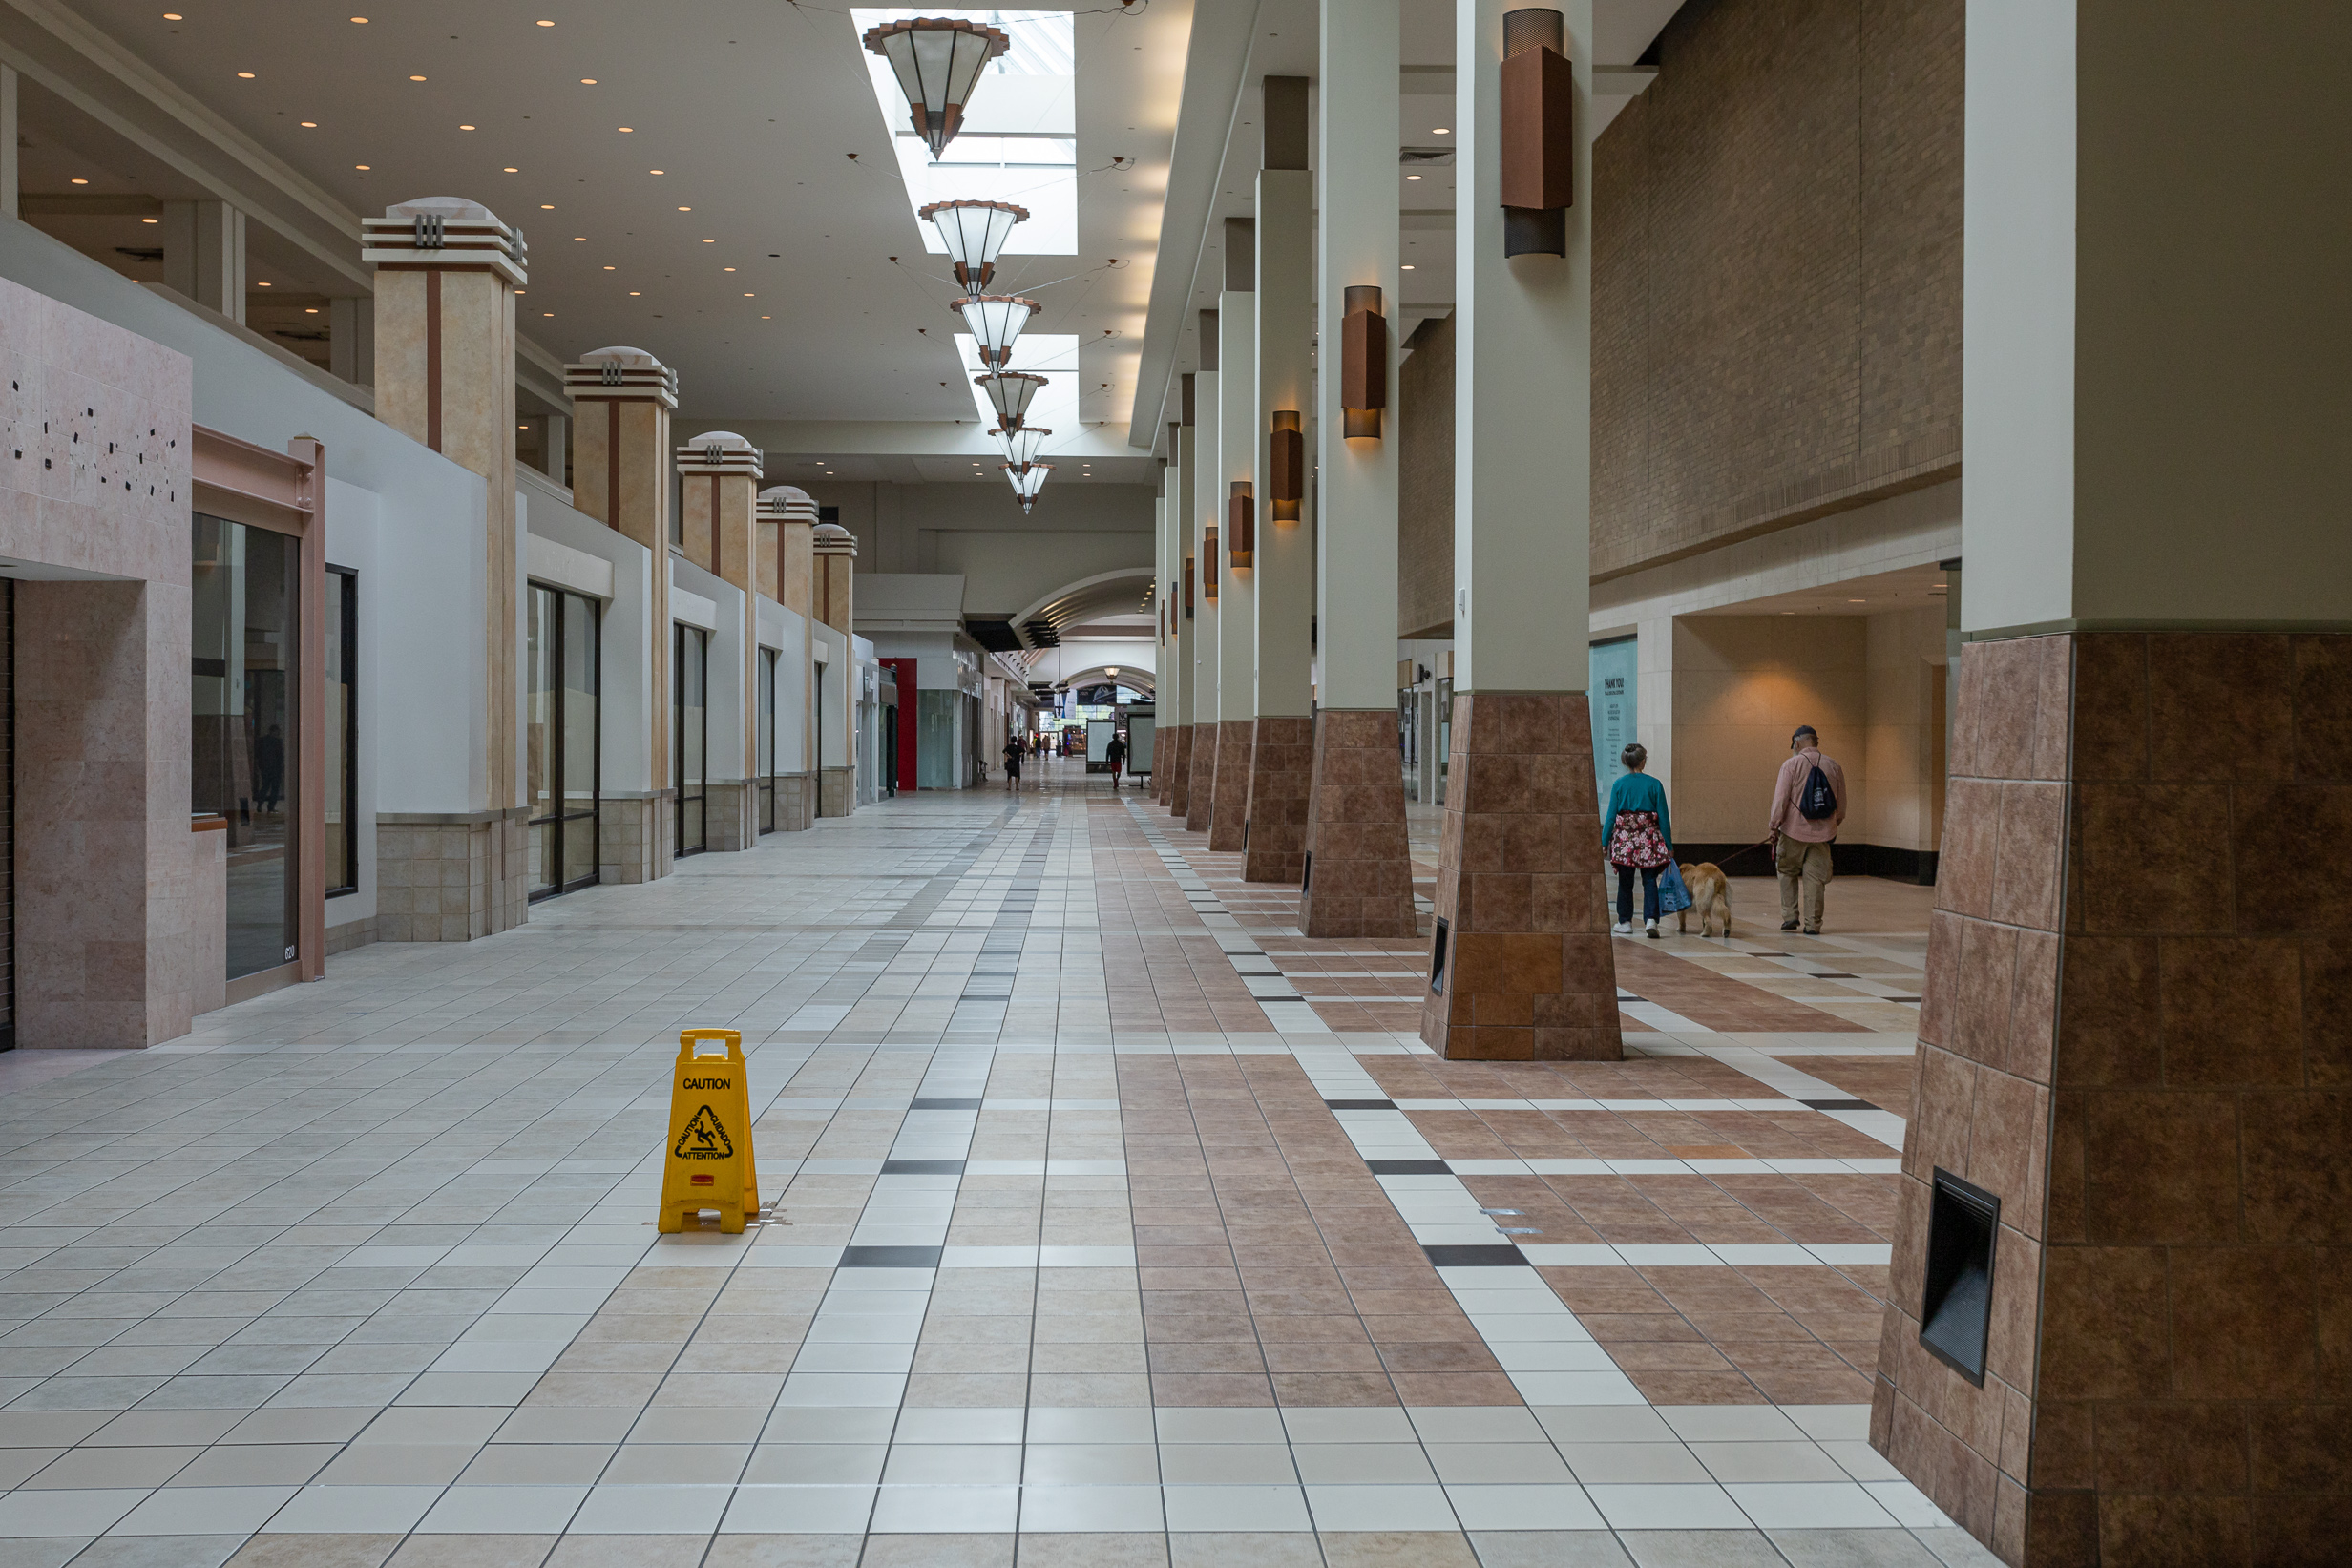 Mall by Mall, America’s Interior Is Wasting Away